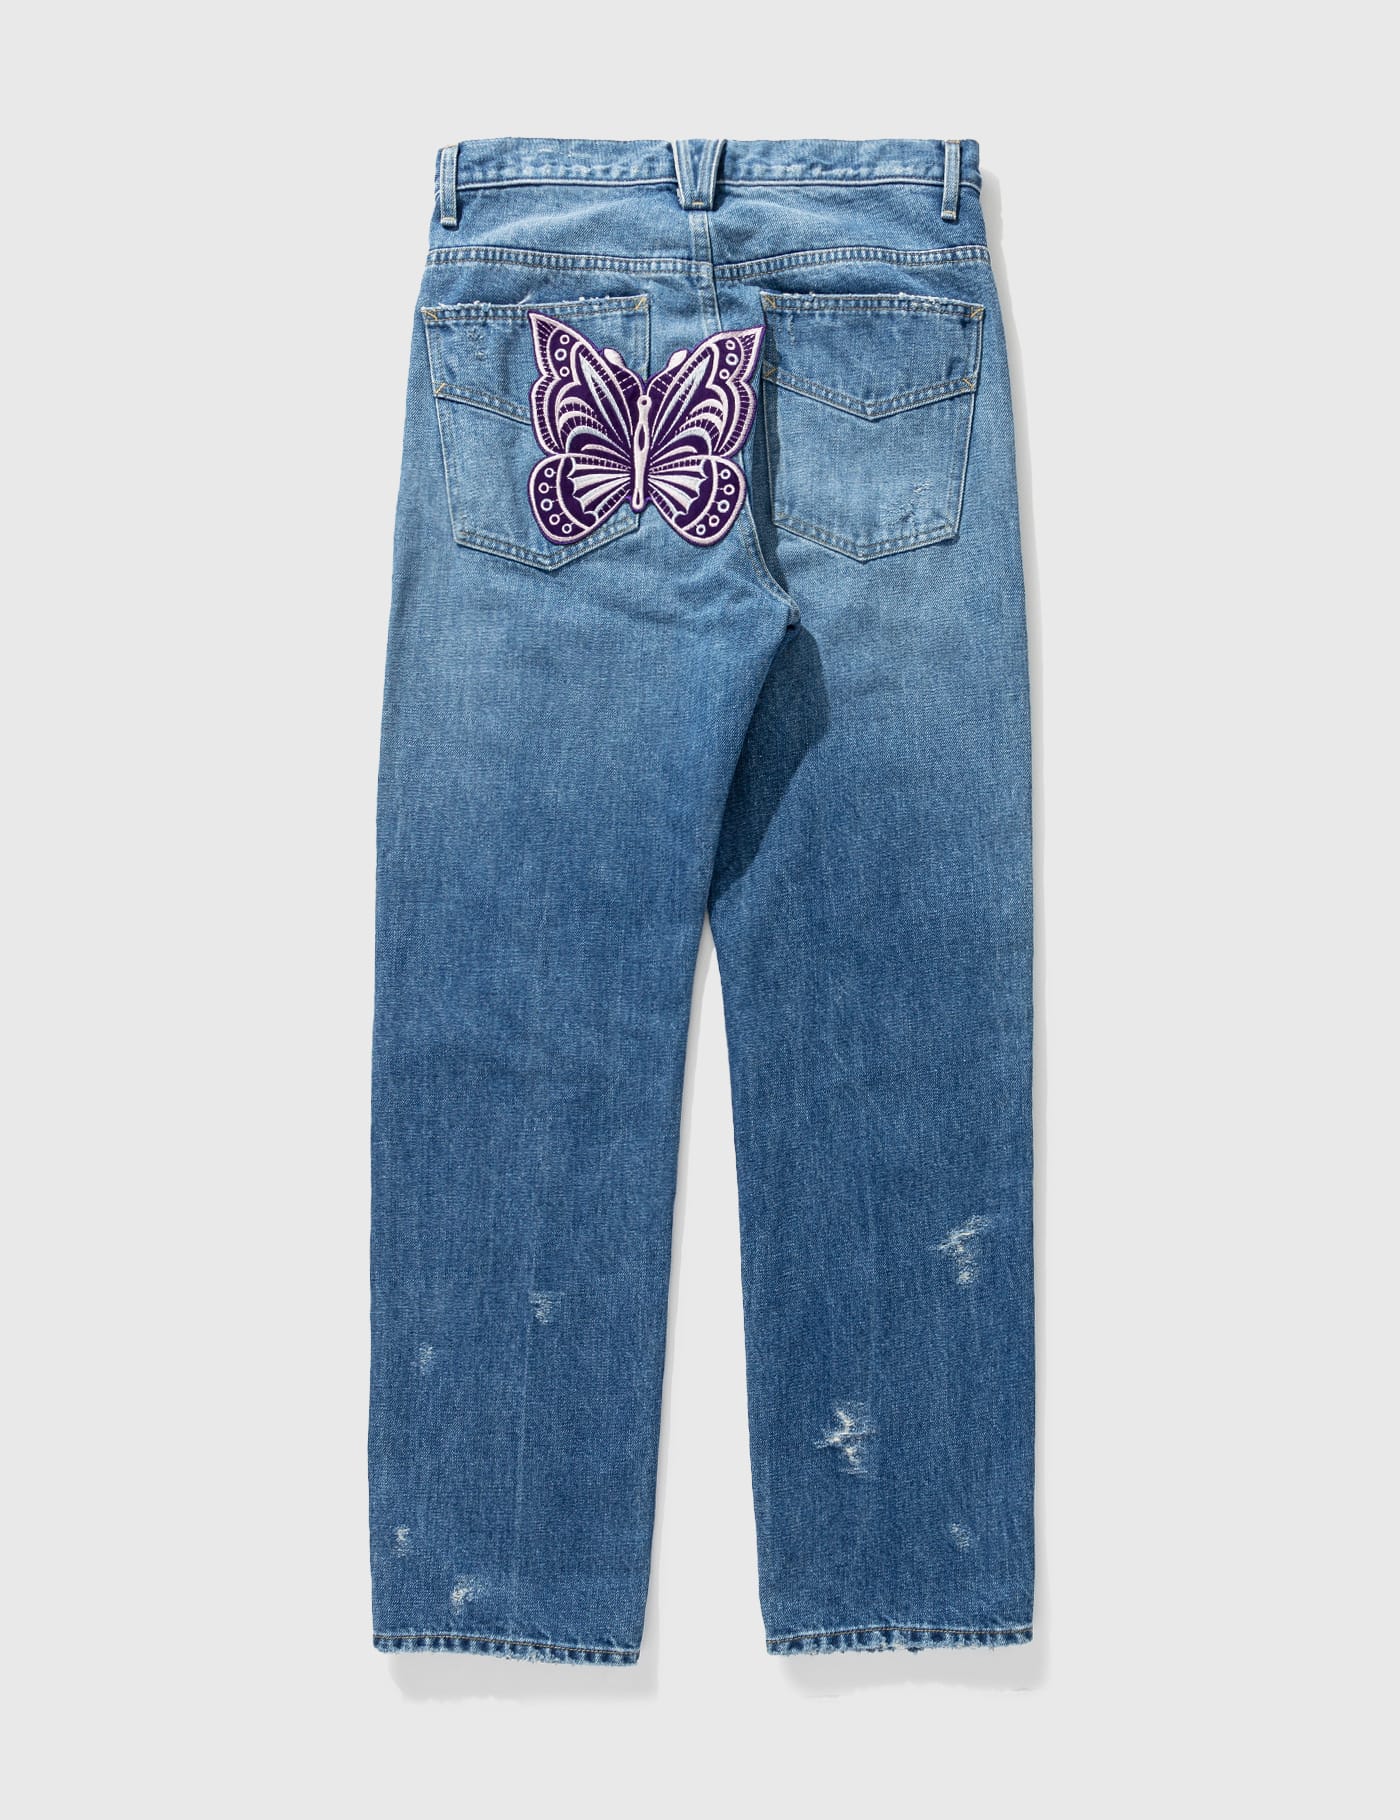 Needles - Assorted Patches Jeans | HBX - Globally Curated Fashion